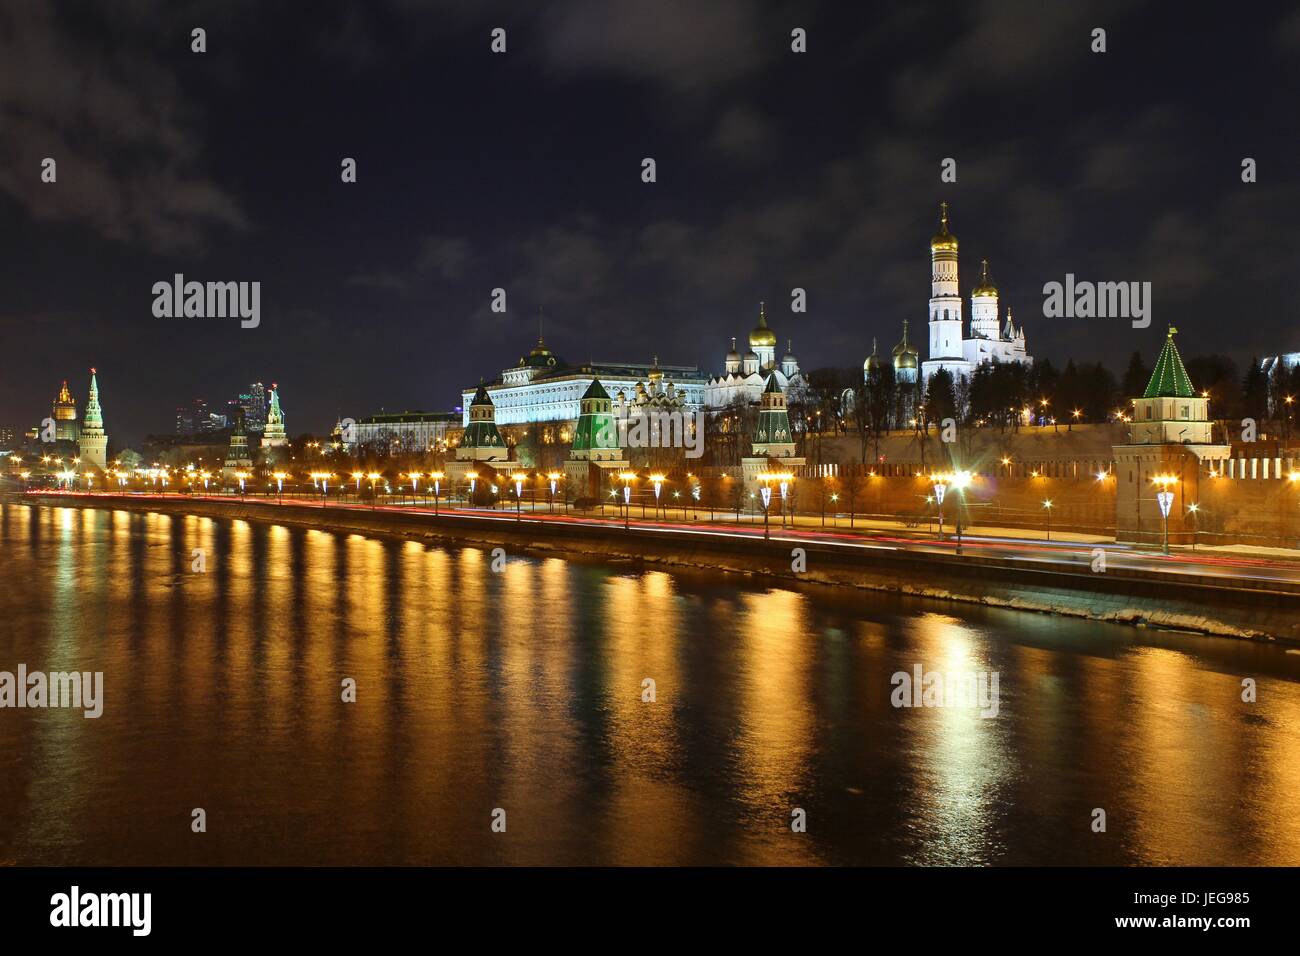 Cityscape of Kremlin wall and river in Moscow, Russia- night scene. Stock Photo